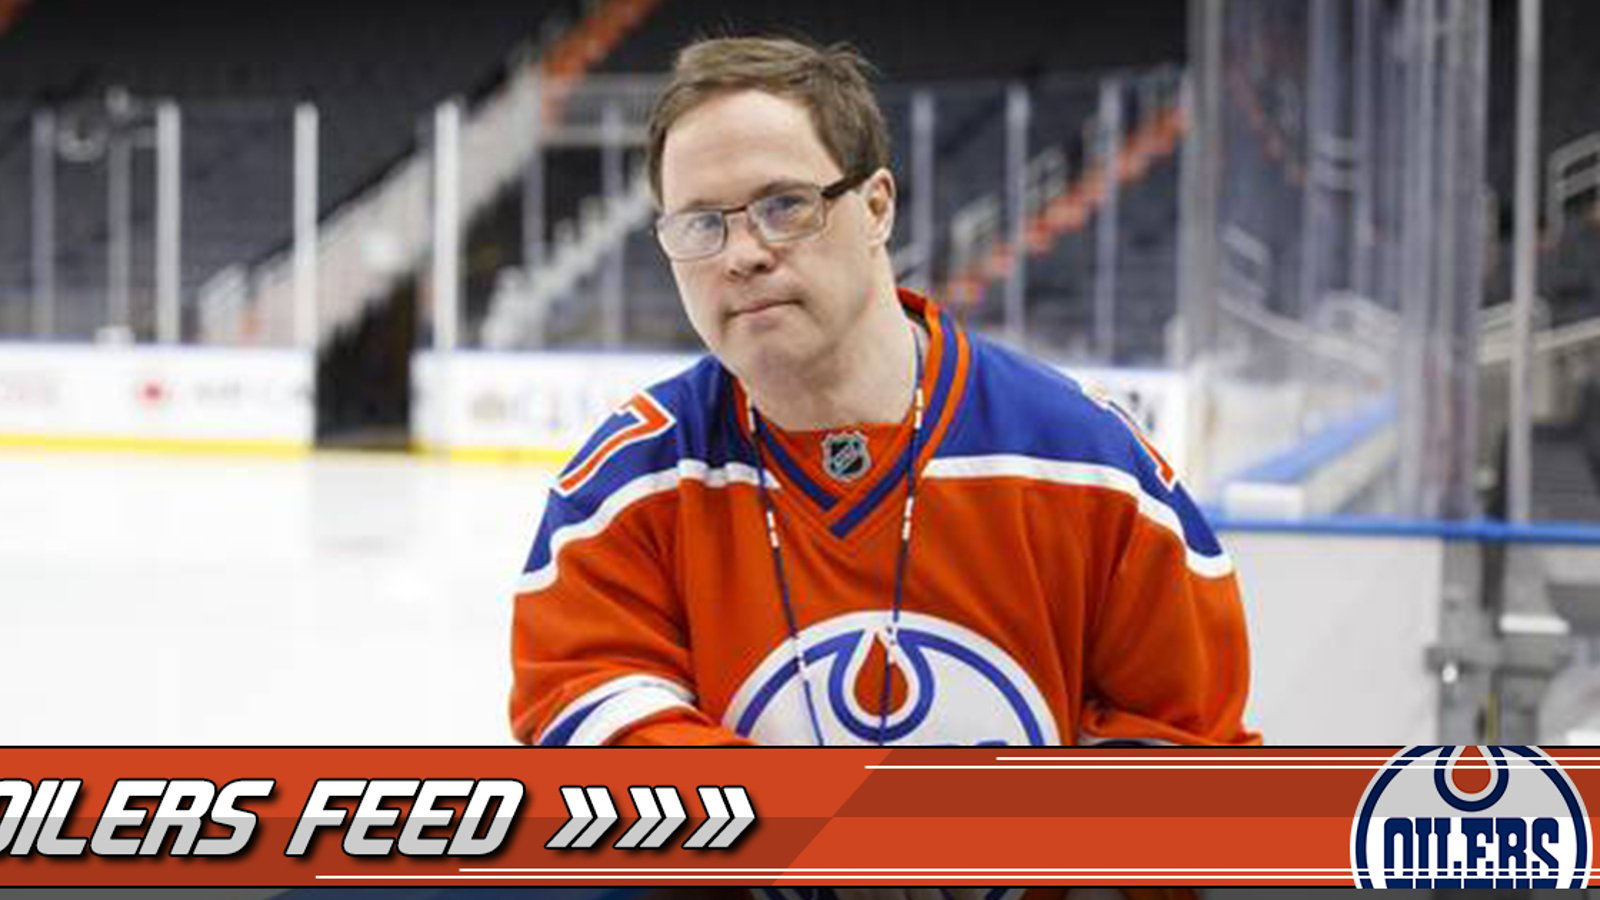 FEEL GOOD: Meet the special fan behind the Oilers success